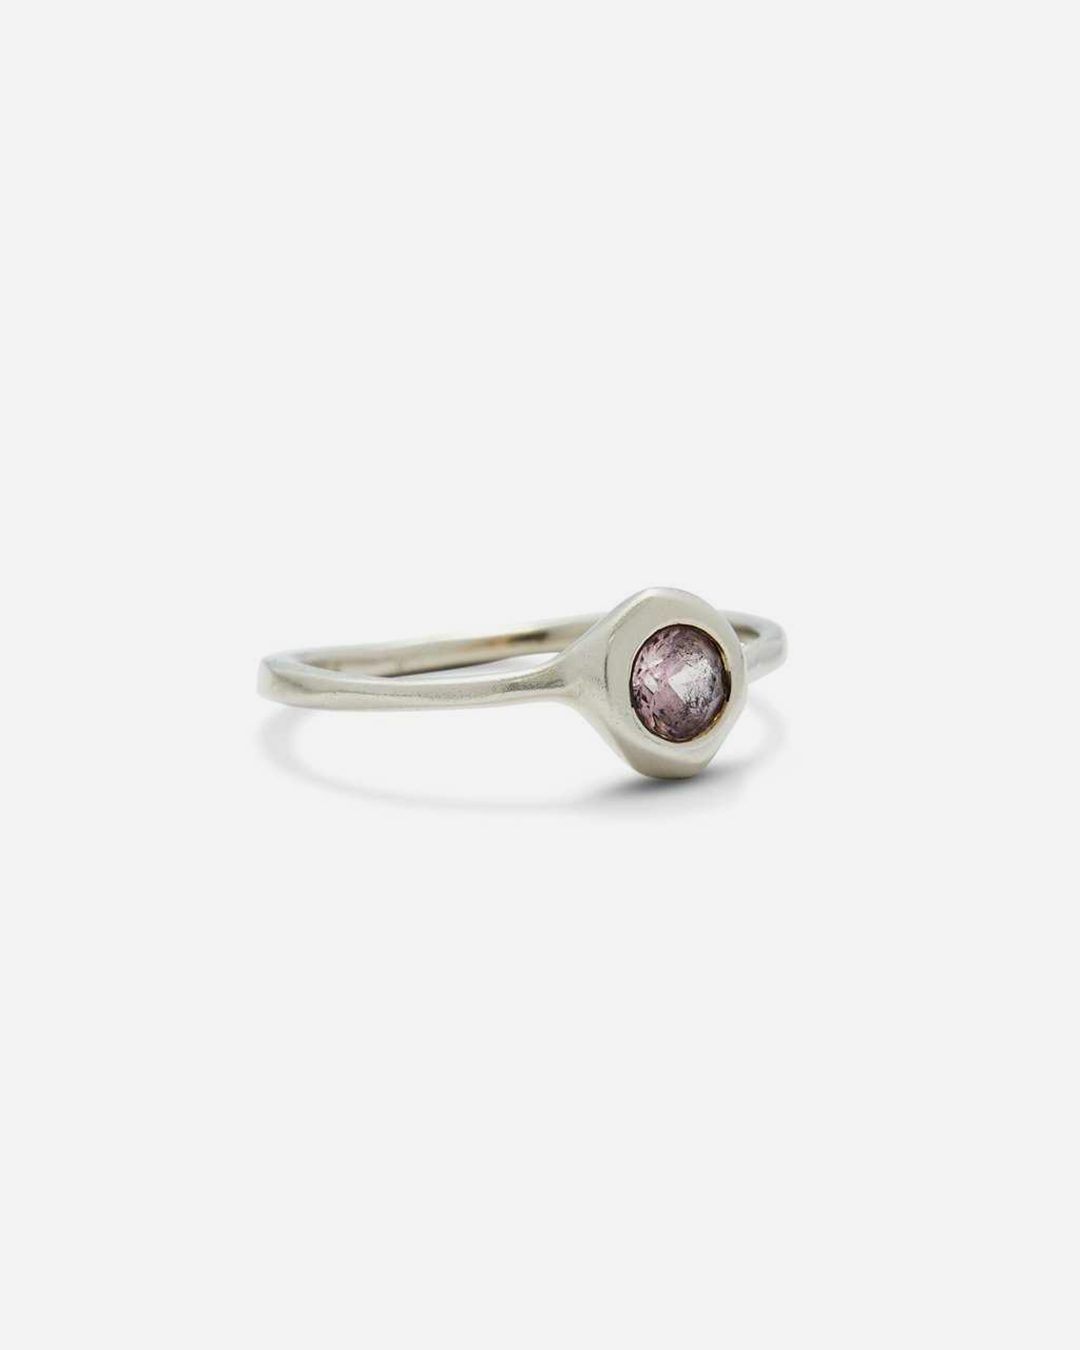 Pebble / Champagne Malaya Garnet Ring By Hiroyo in rings Category